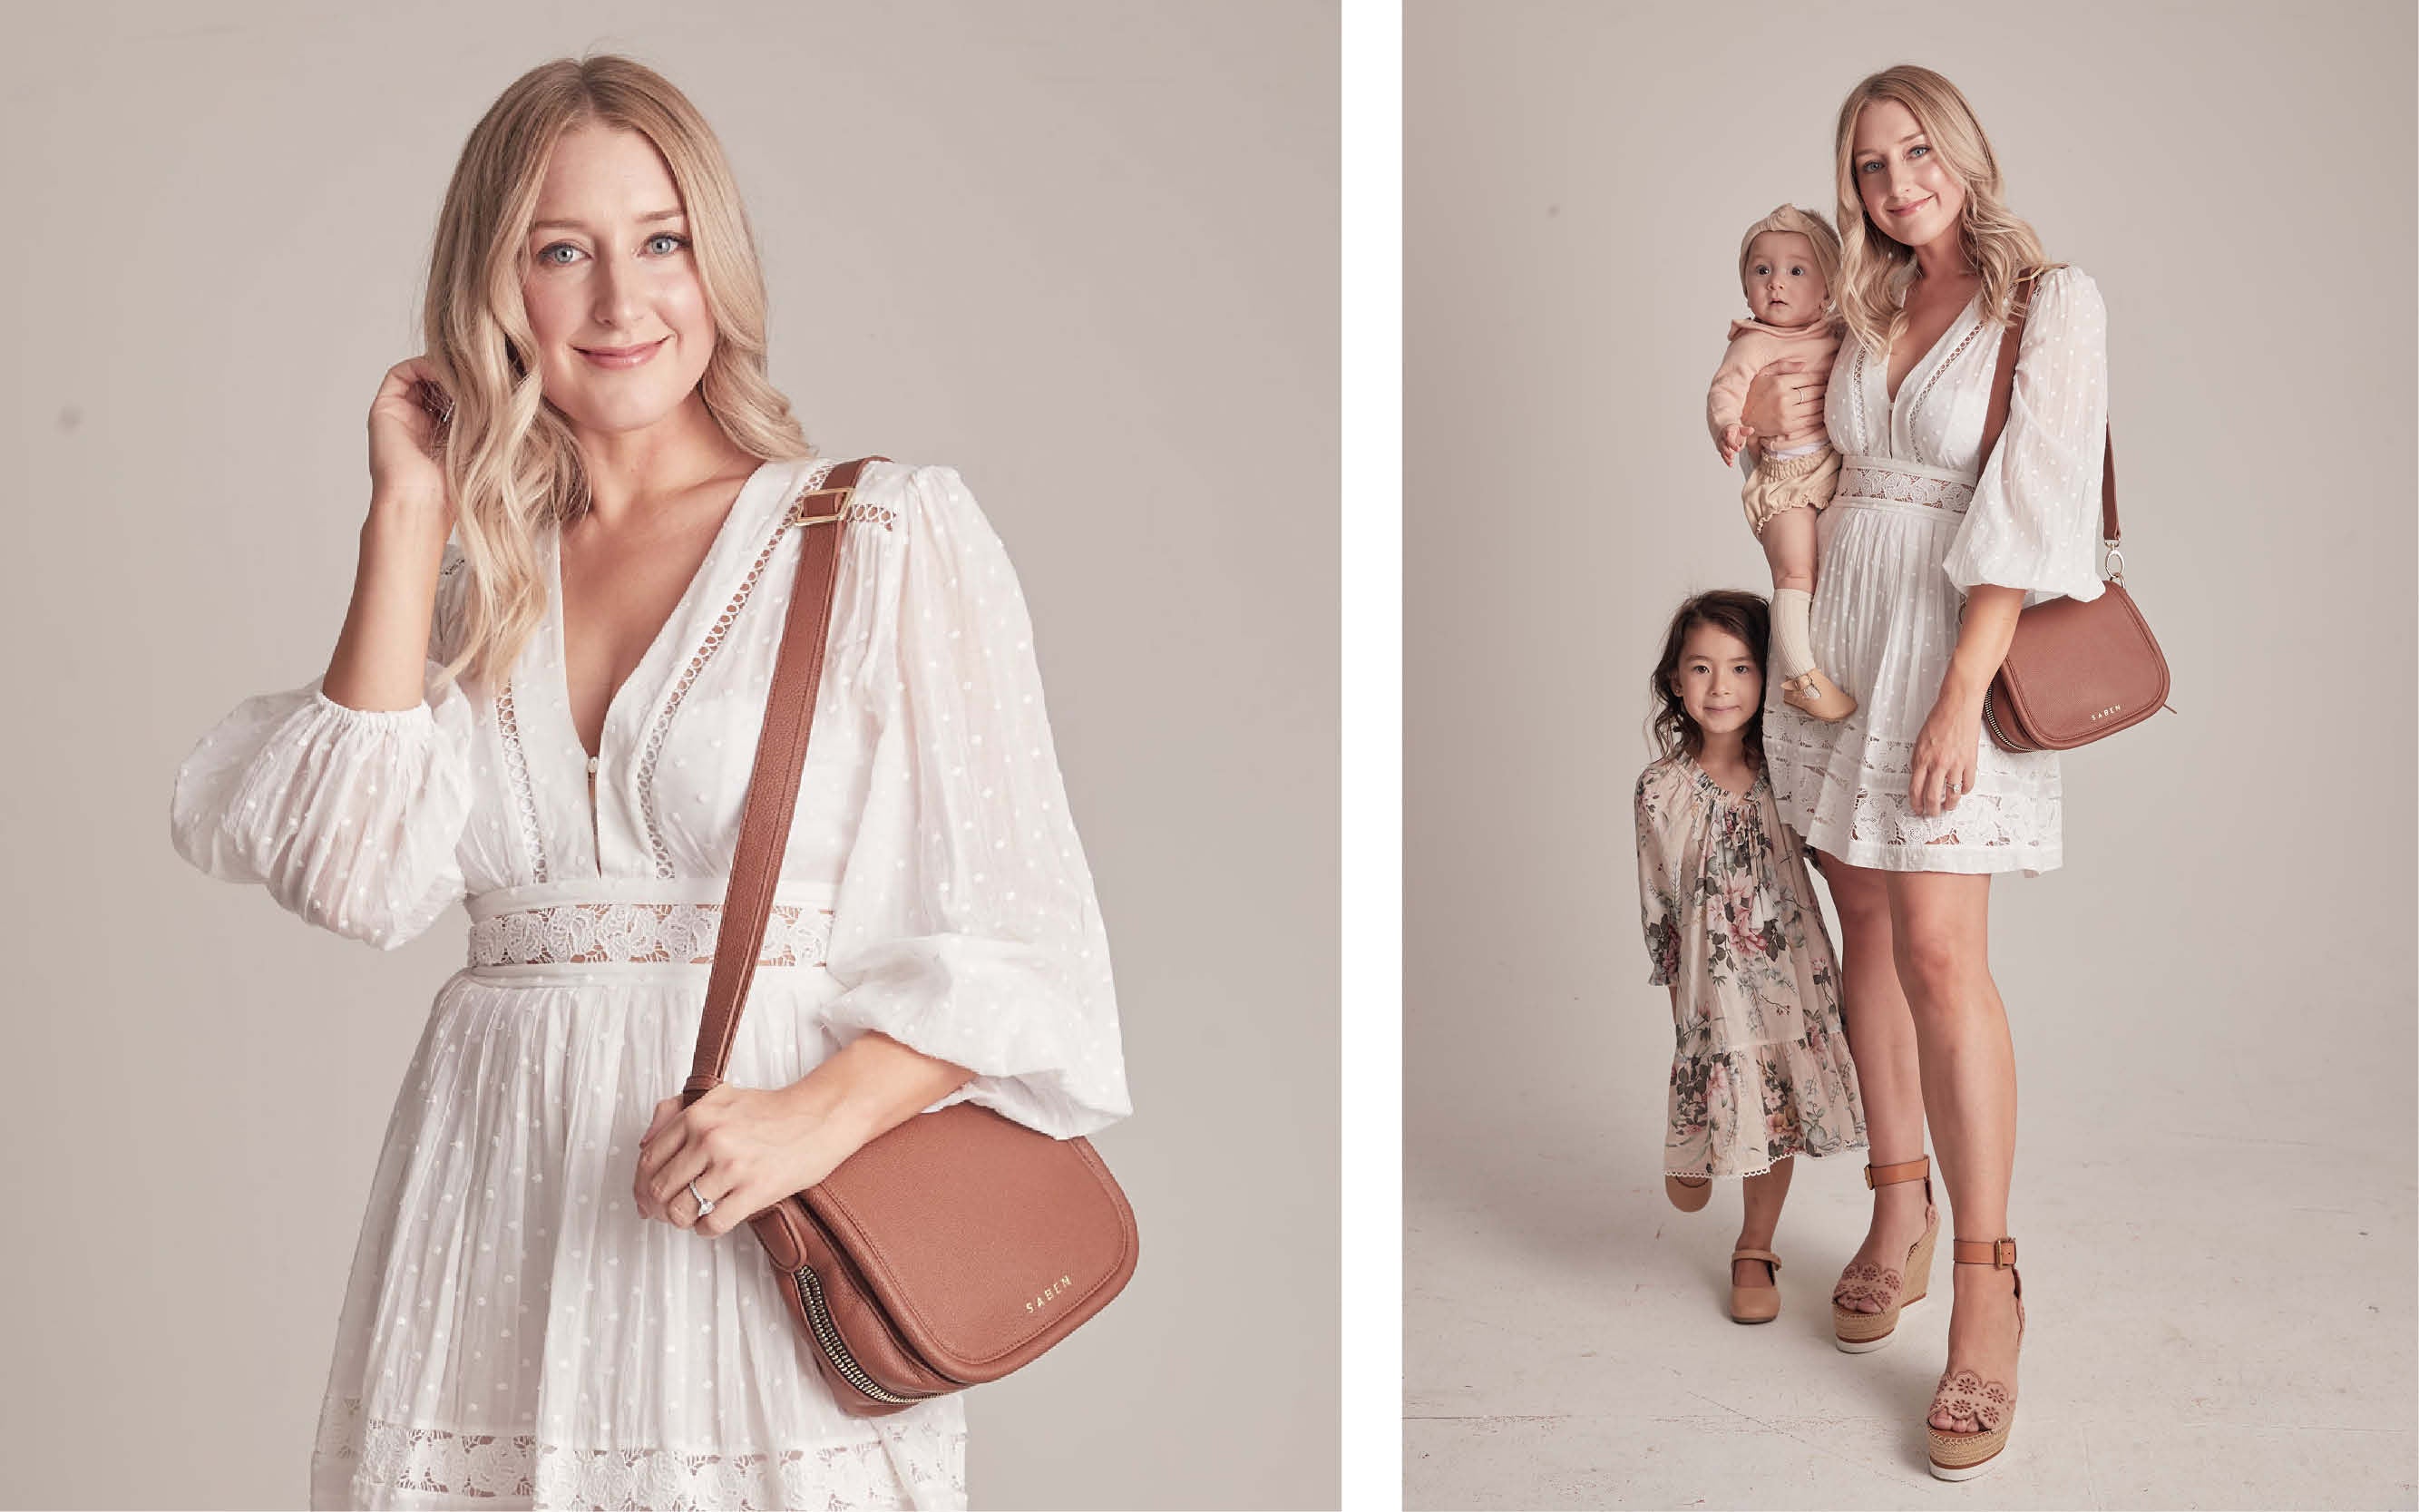 Holly Wright wears Saddie chestnut handbag for Saben Mothers Day Campaign